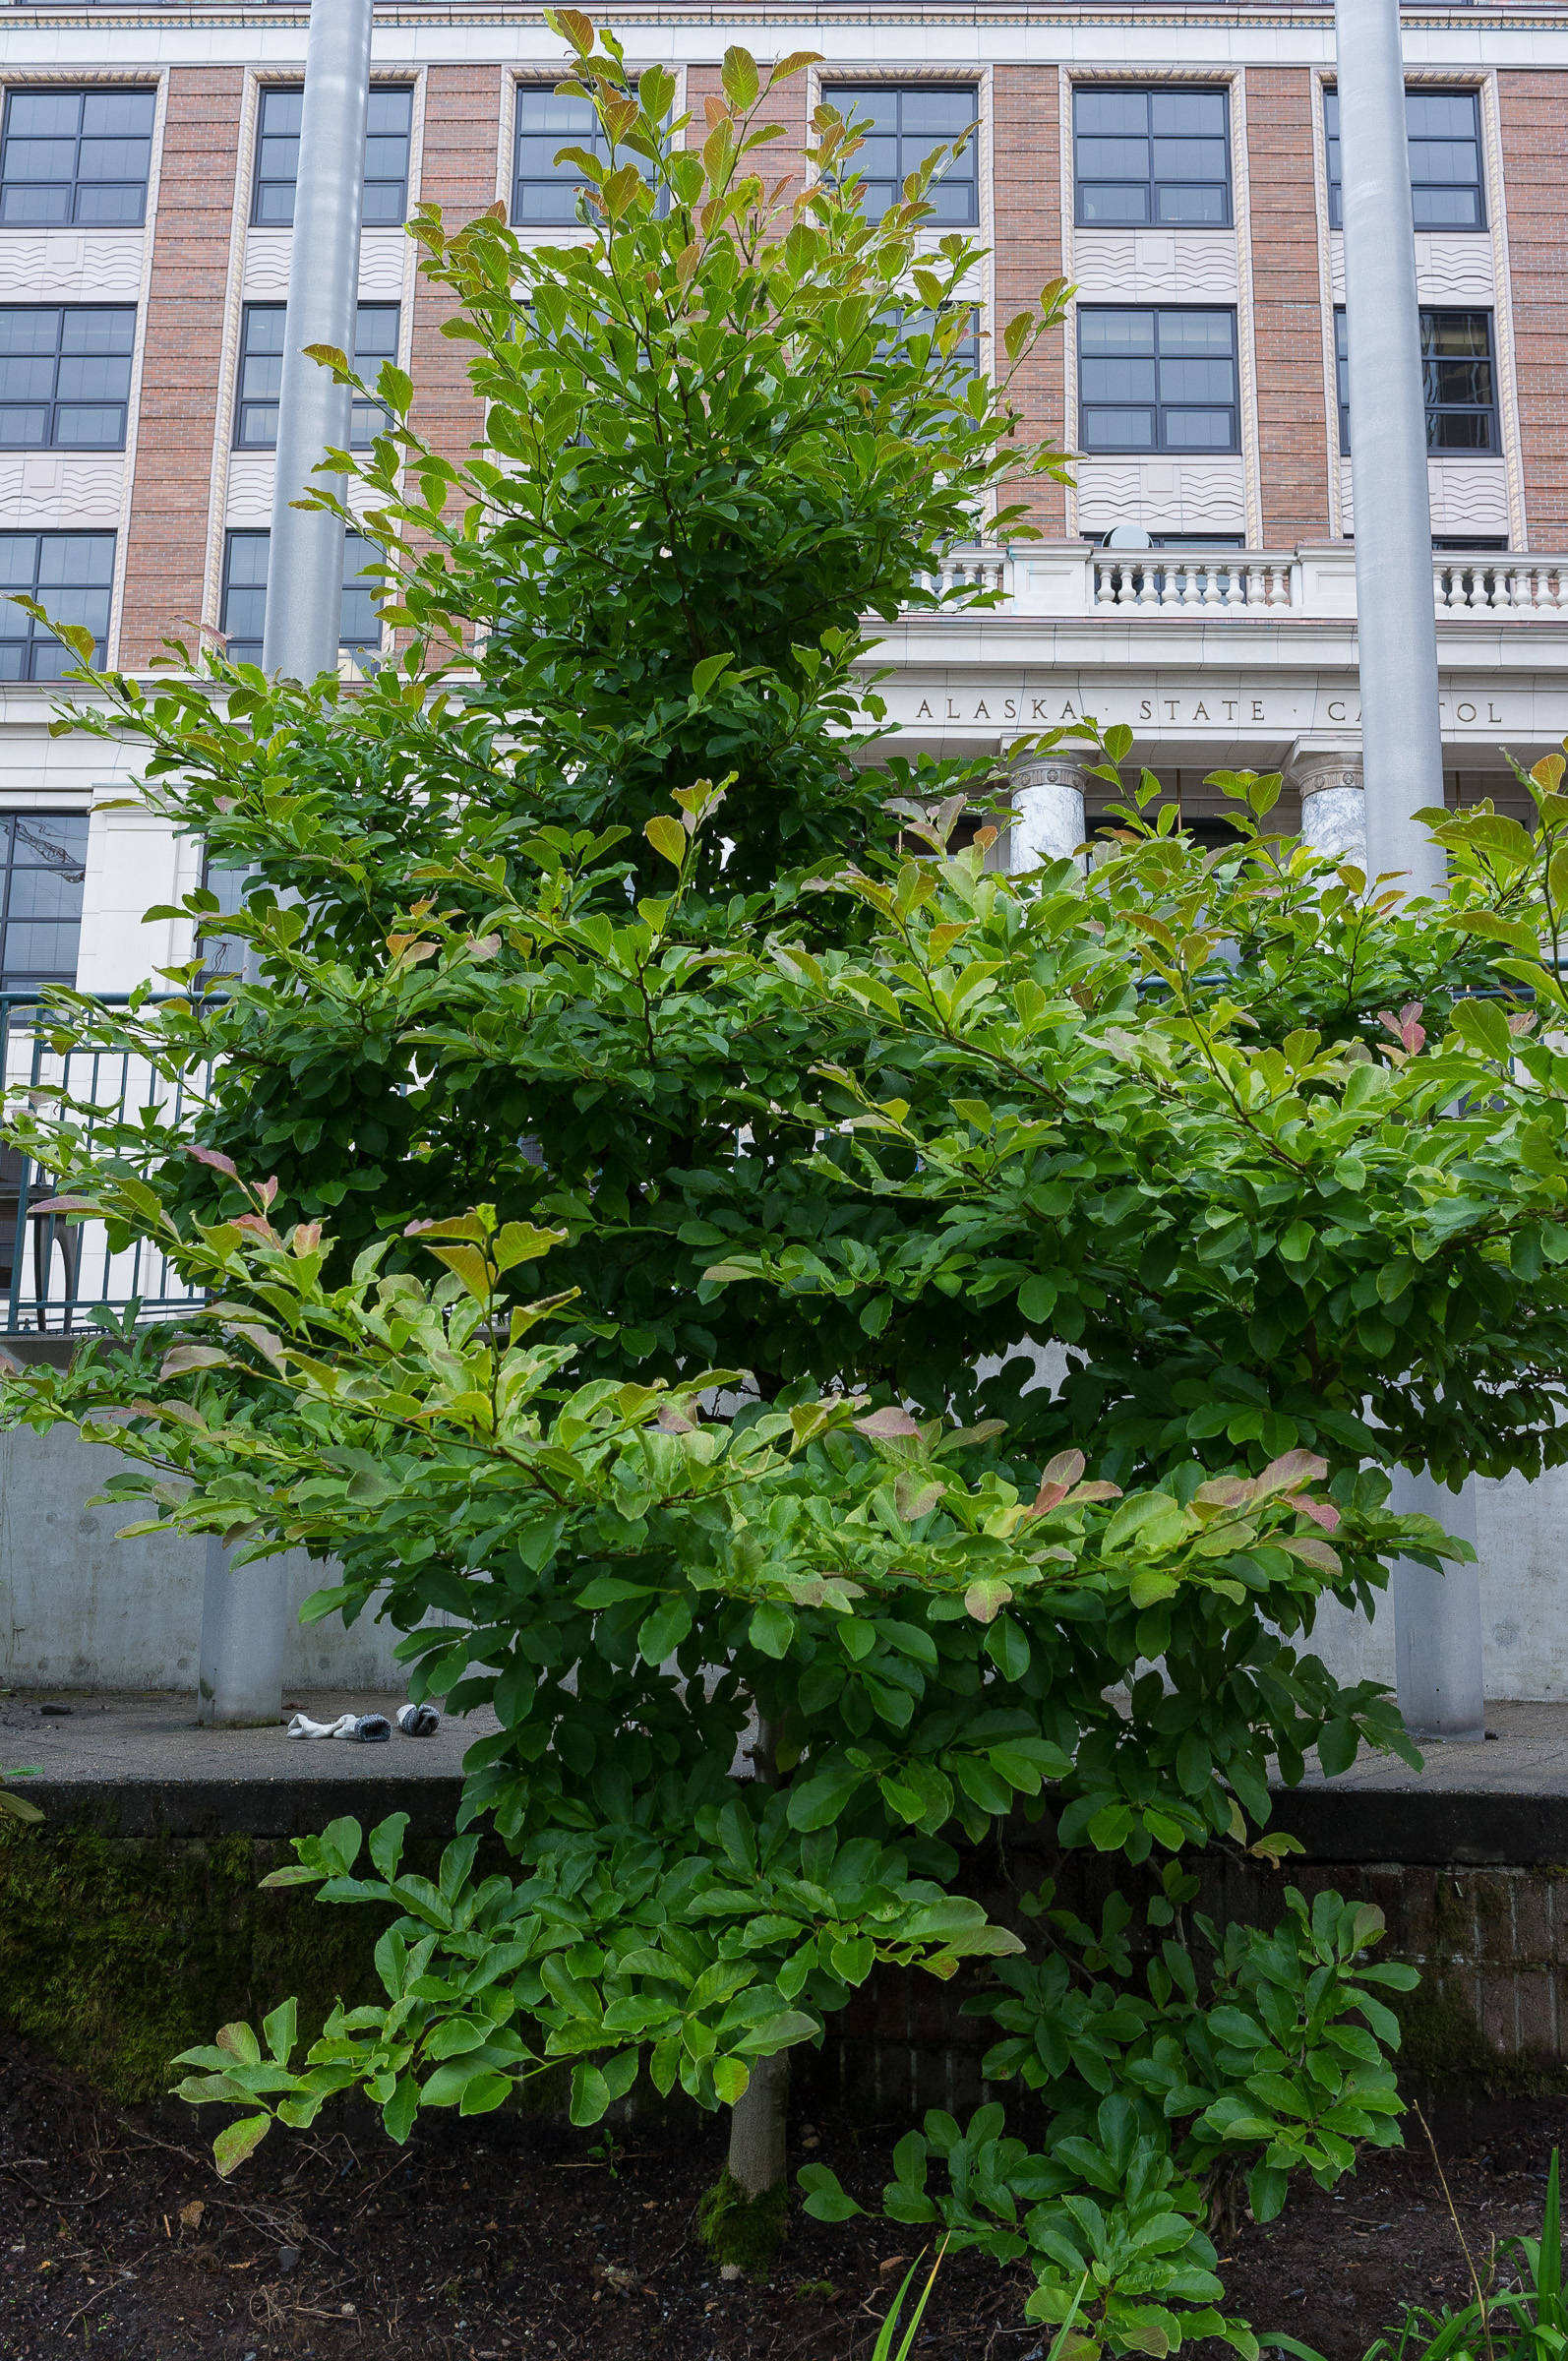 A magnolia tree planted in the memorial garden dedicated to Chief Justice Jay Rabinowitz at the Dimond Courthouse on Thursday, Aug. 24, 2017. (Michael Penn | Juneau Empire)